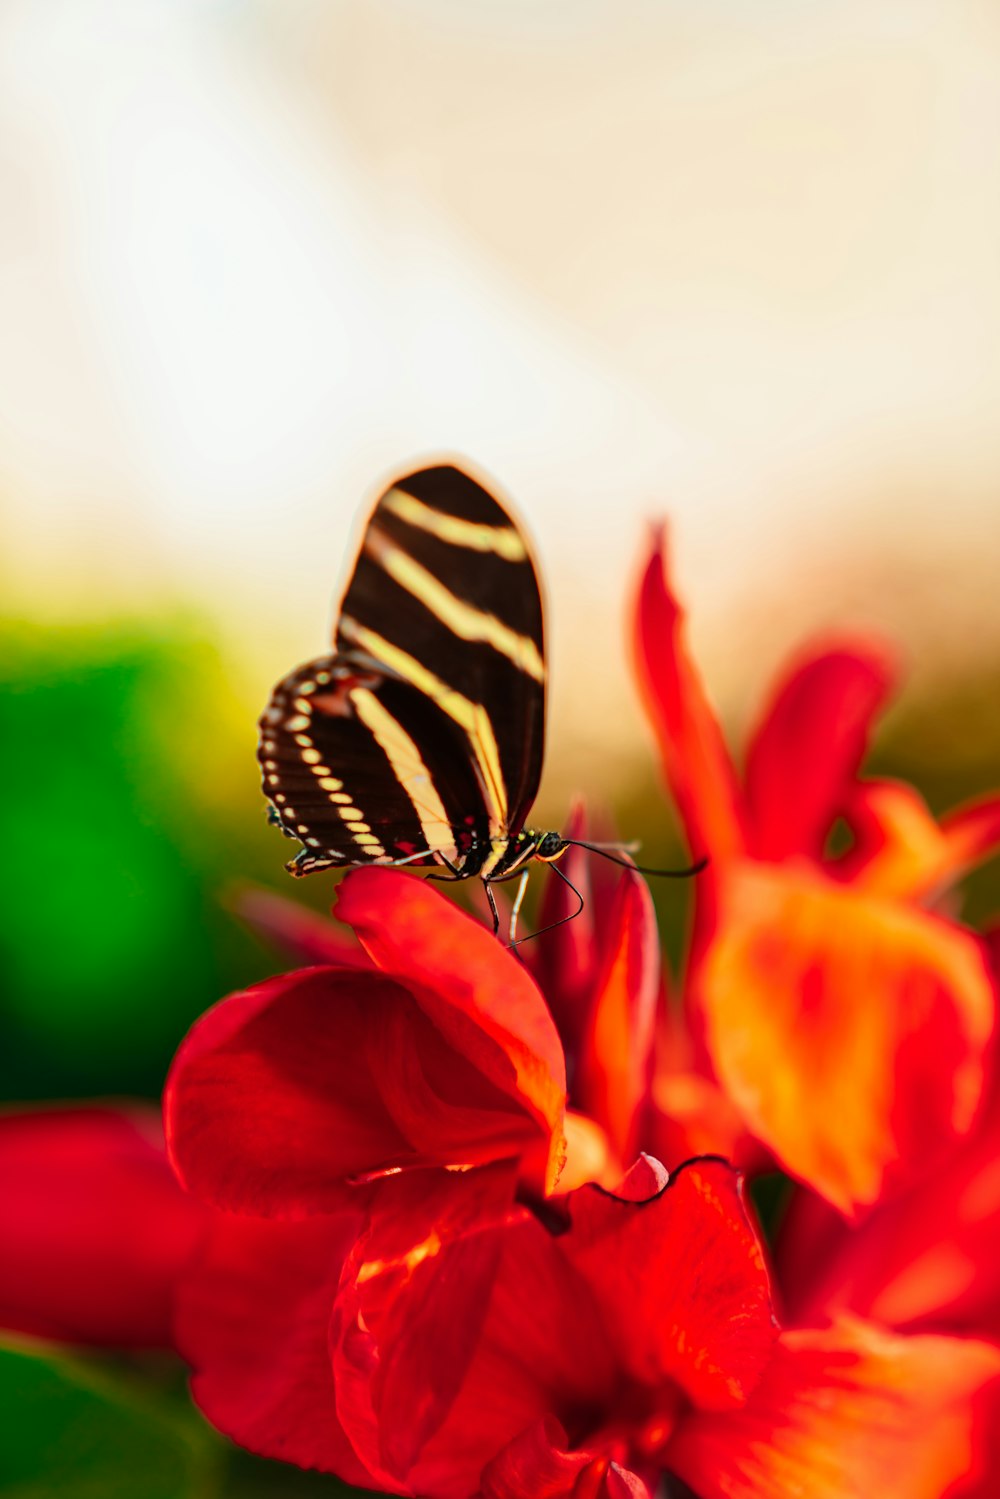 butterfly perched on red flower